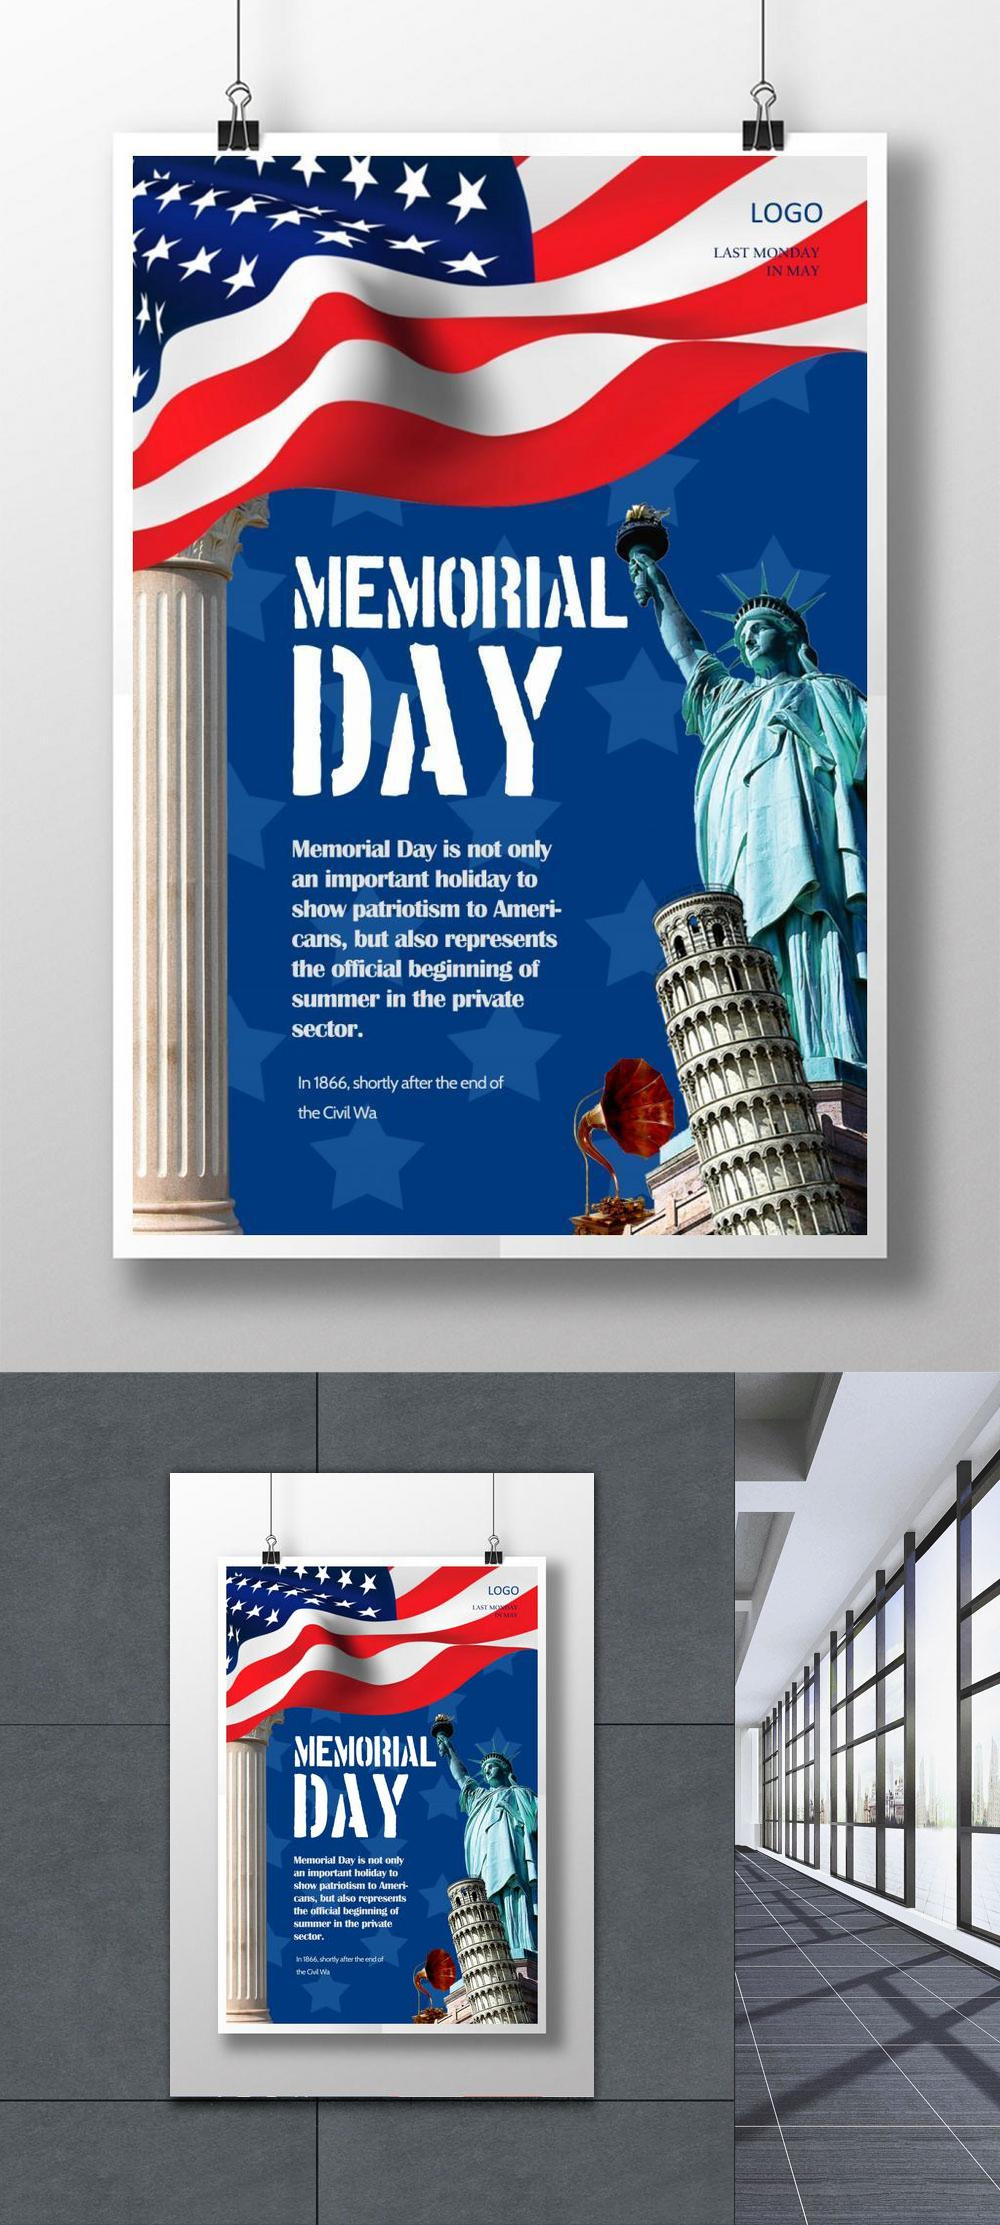 American memorial day poster template image_picture free download